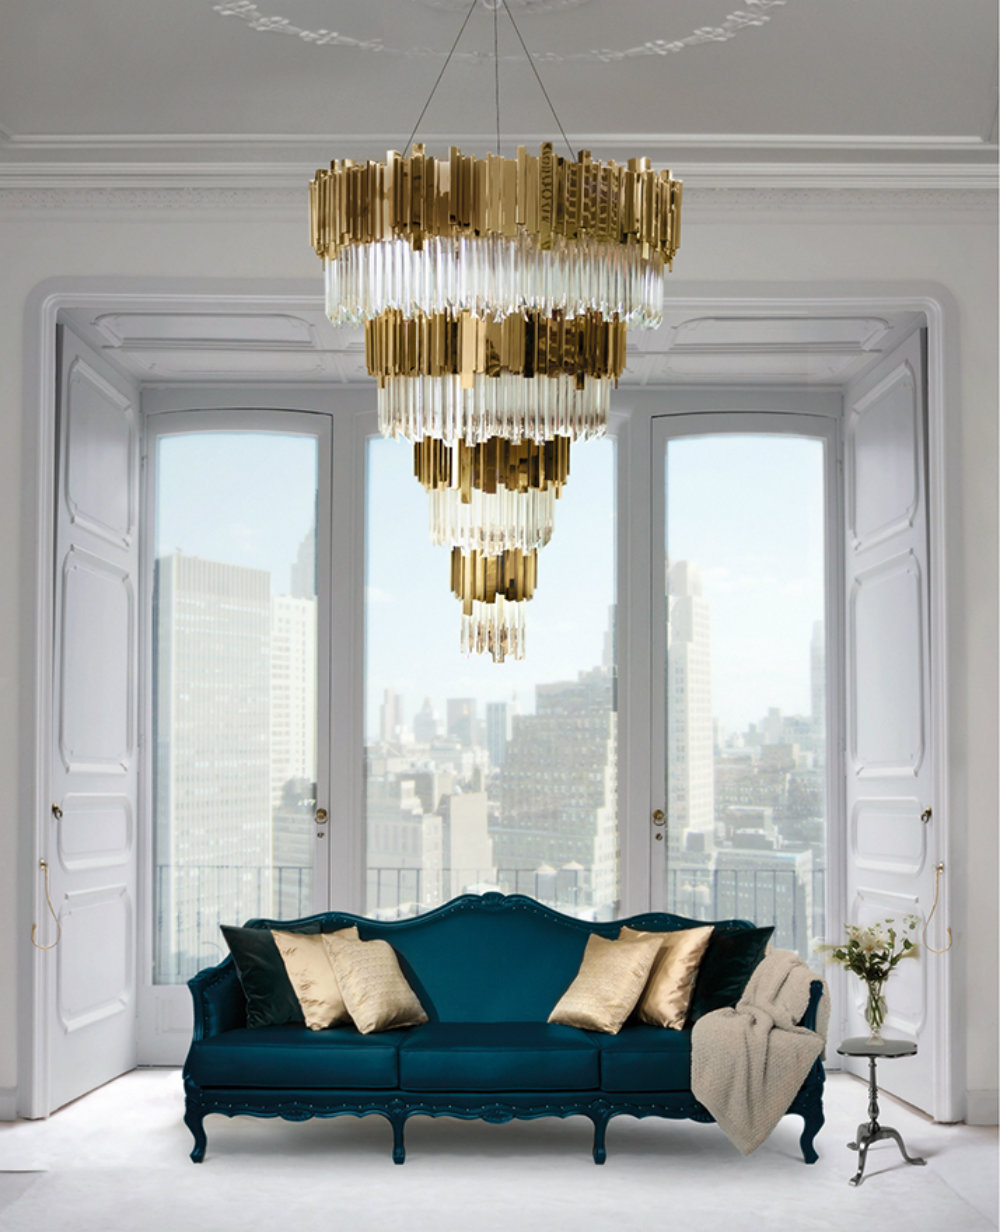 Product Of The Week: Elevate Your Home Decor With The Empire Chandelier